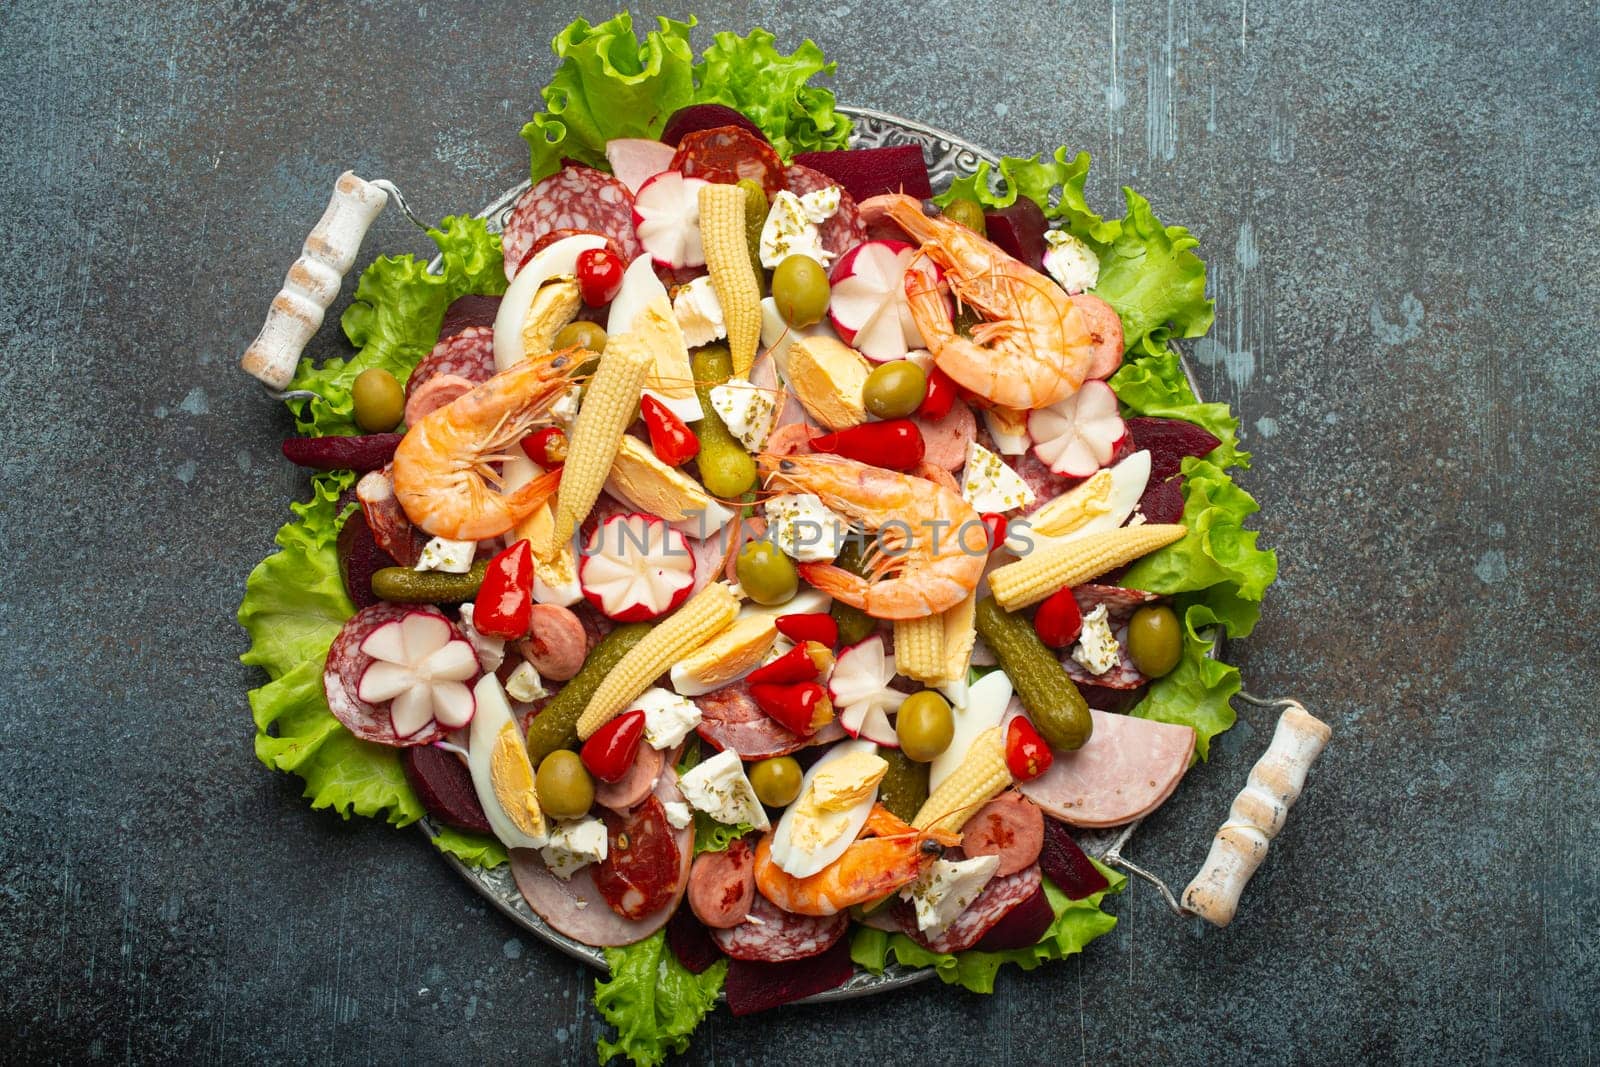 Fiambre, salad of Guatemala, Mexico and Latin America, on large plate top view white wooden background top view with cold cuts, shrimps. Festive dish for All Saints Day (Day Of The Dead) celebration by its_al_dente